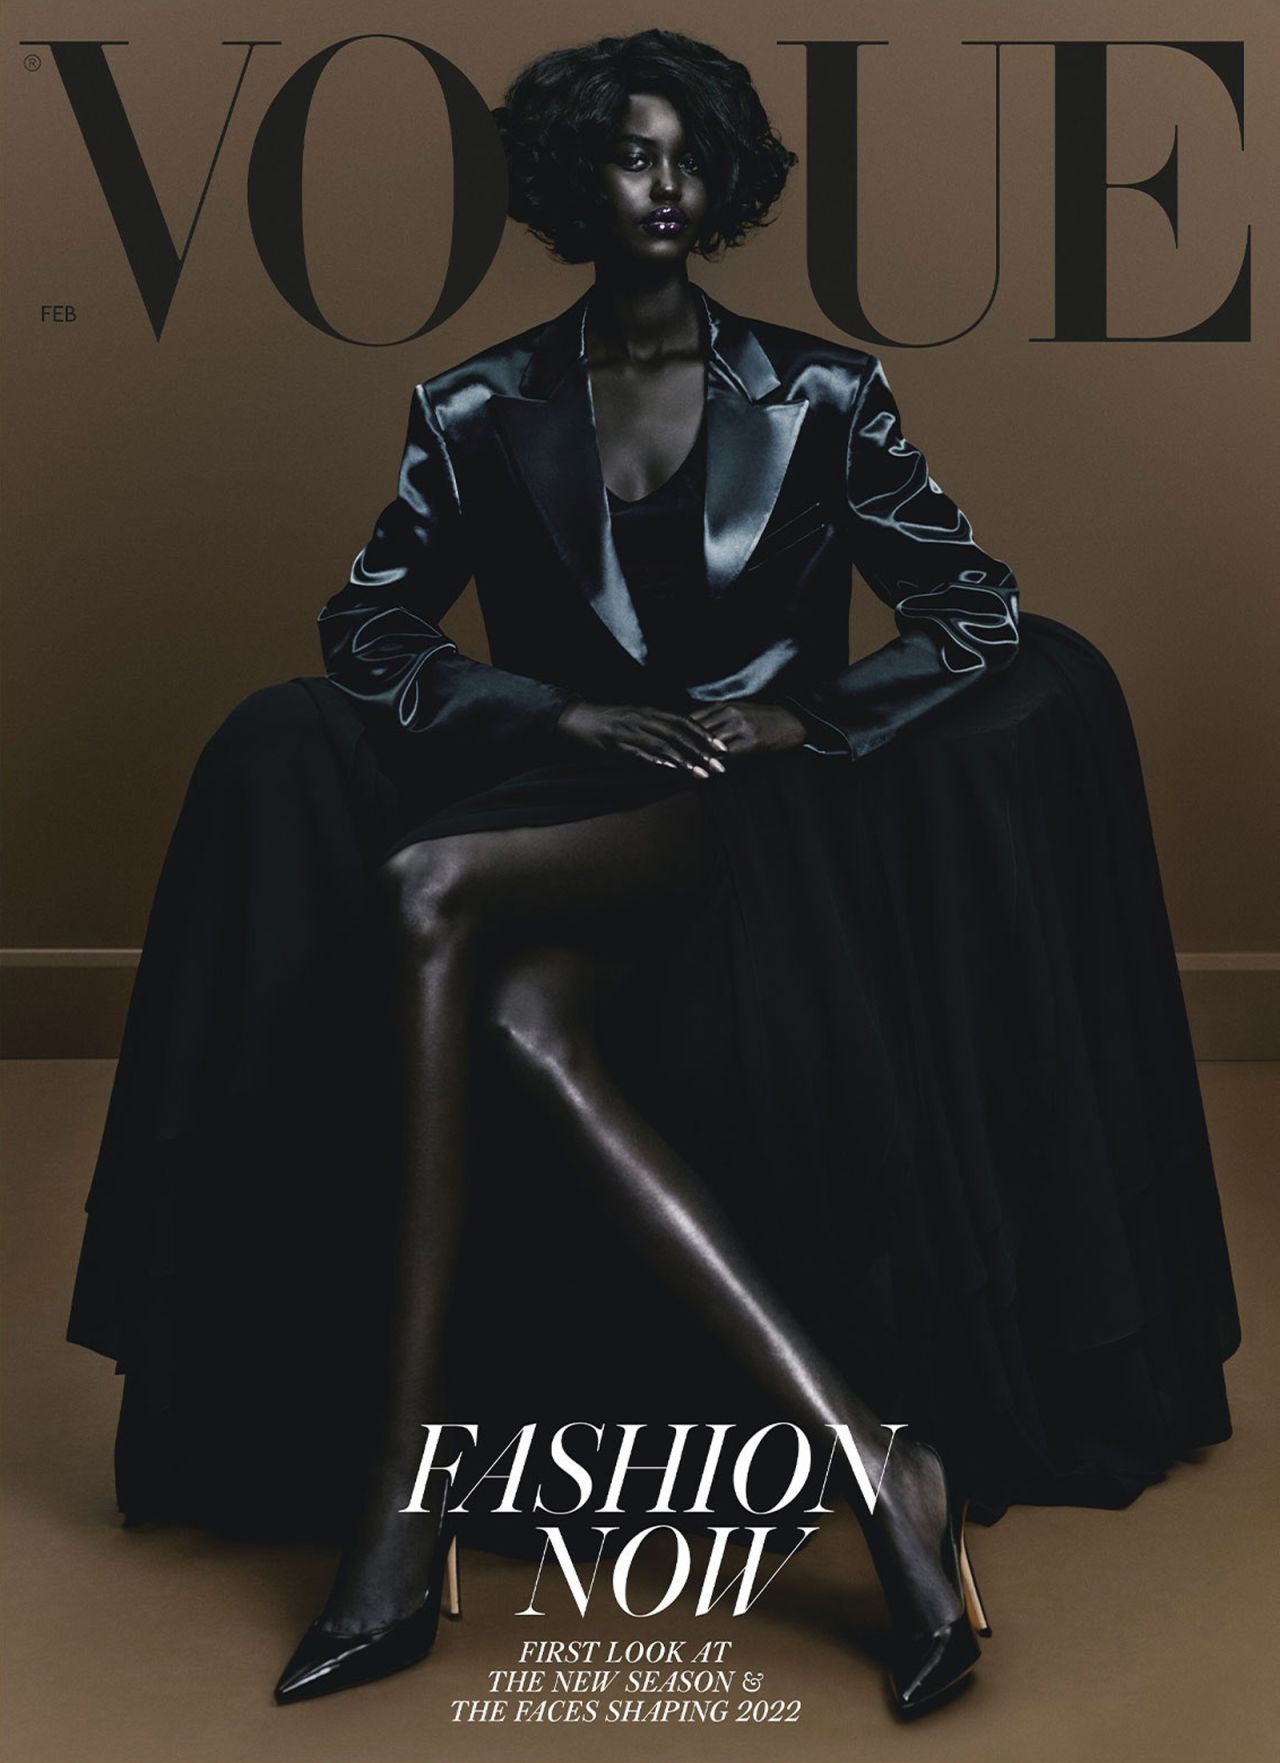 Adut Akech on the cover of British Vogue 